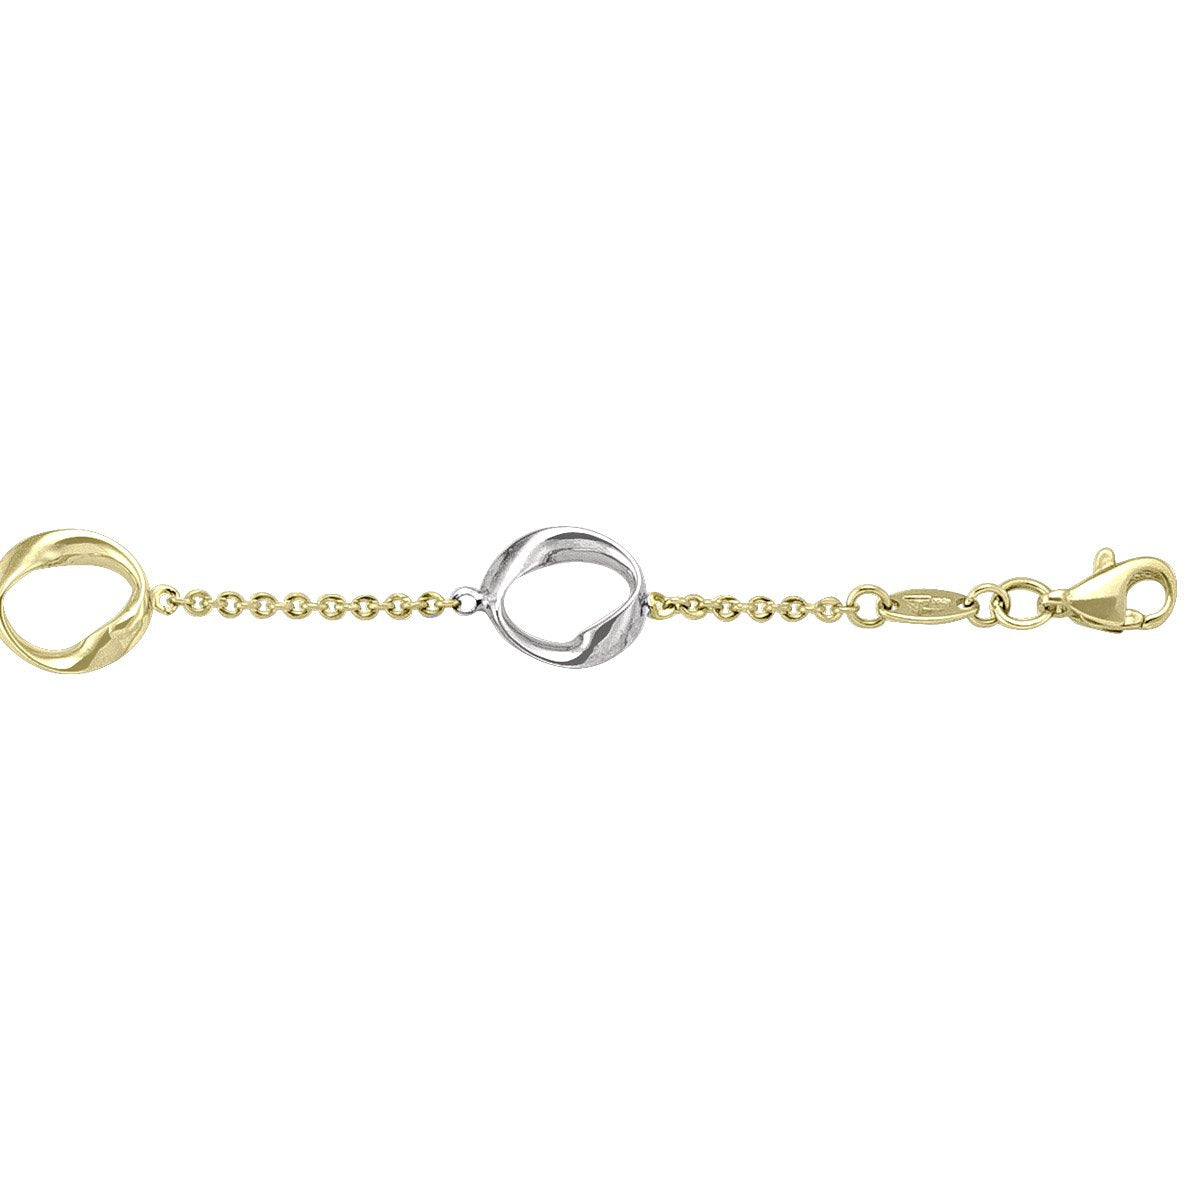 TWO TONE FANCY HOLLOW LINK CHAIN